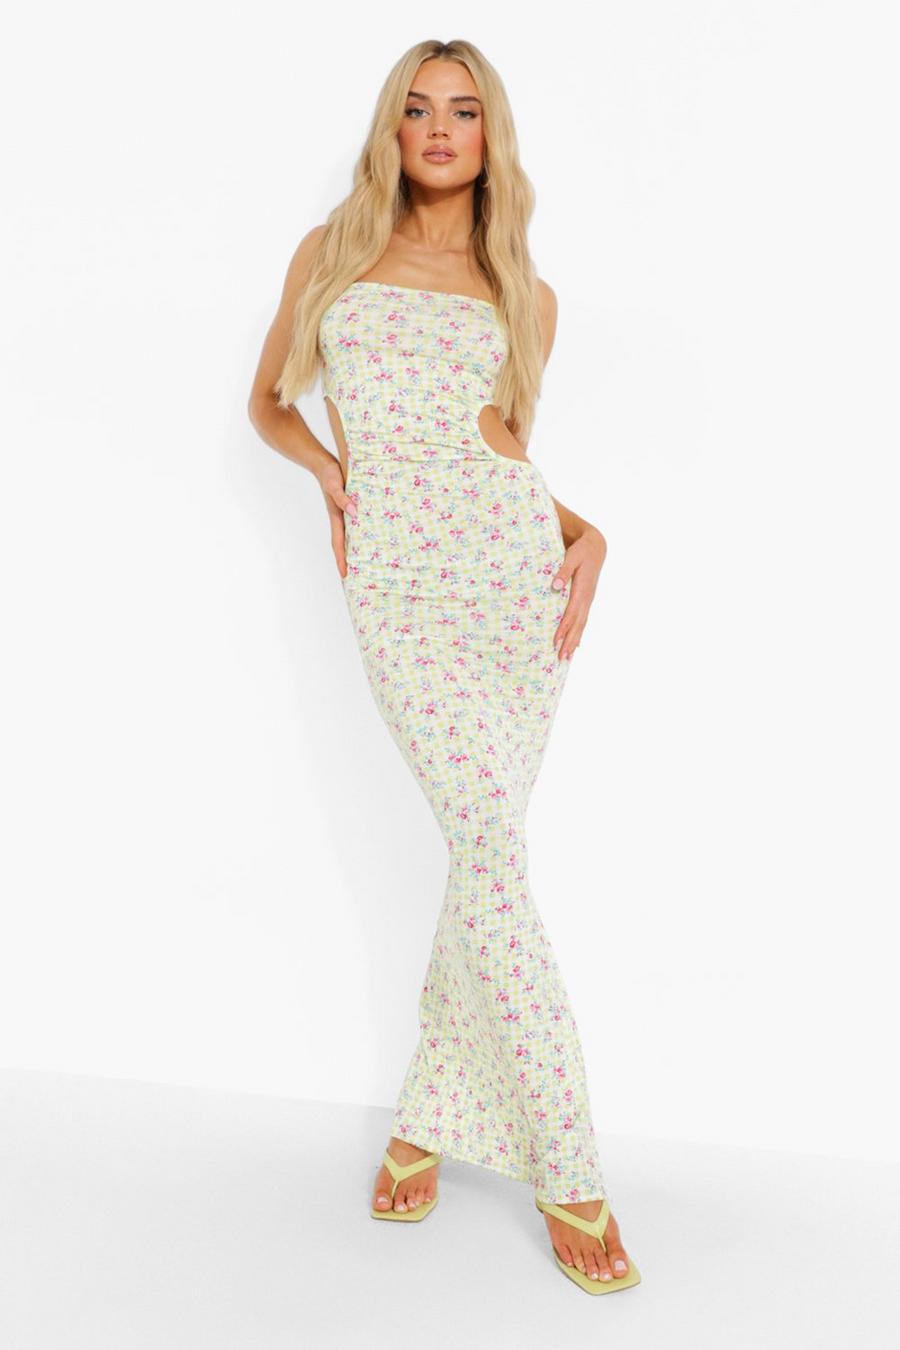 White Gingham Floral Strappy Cut Out Maxi Dress image number 1